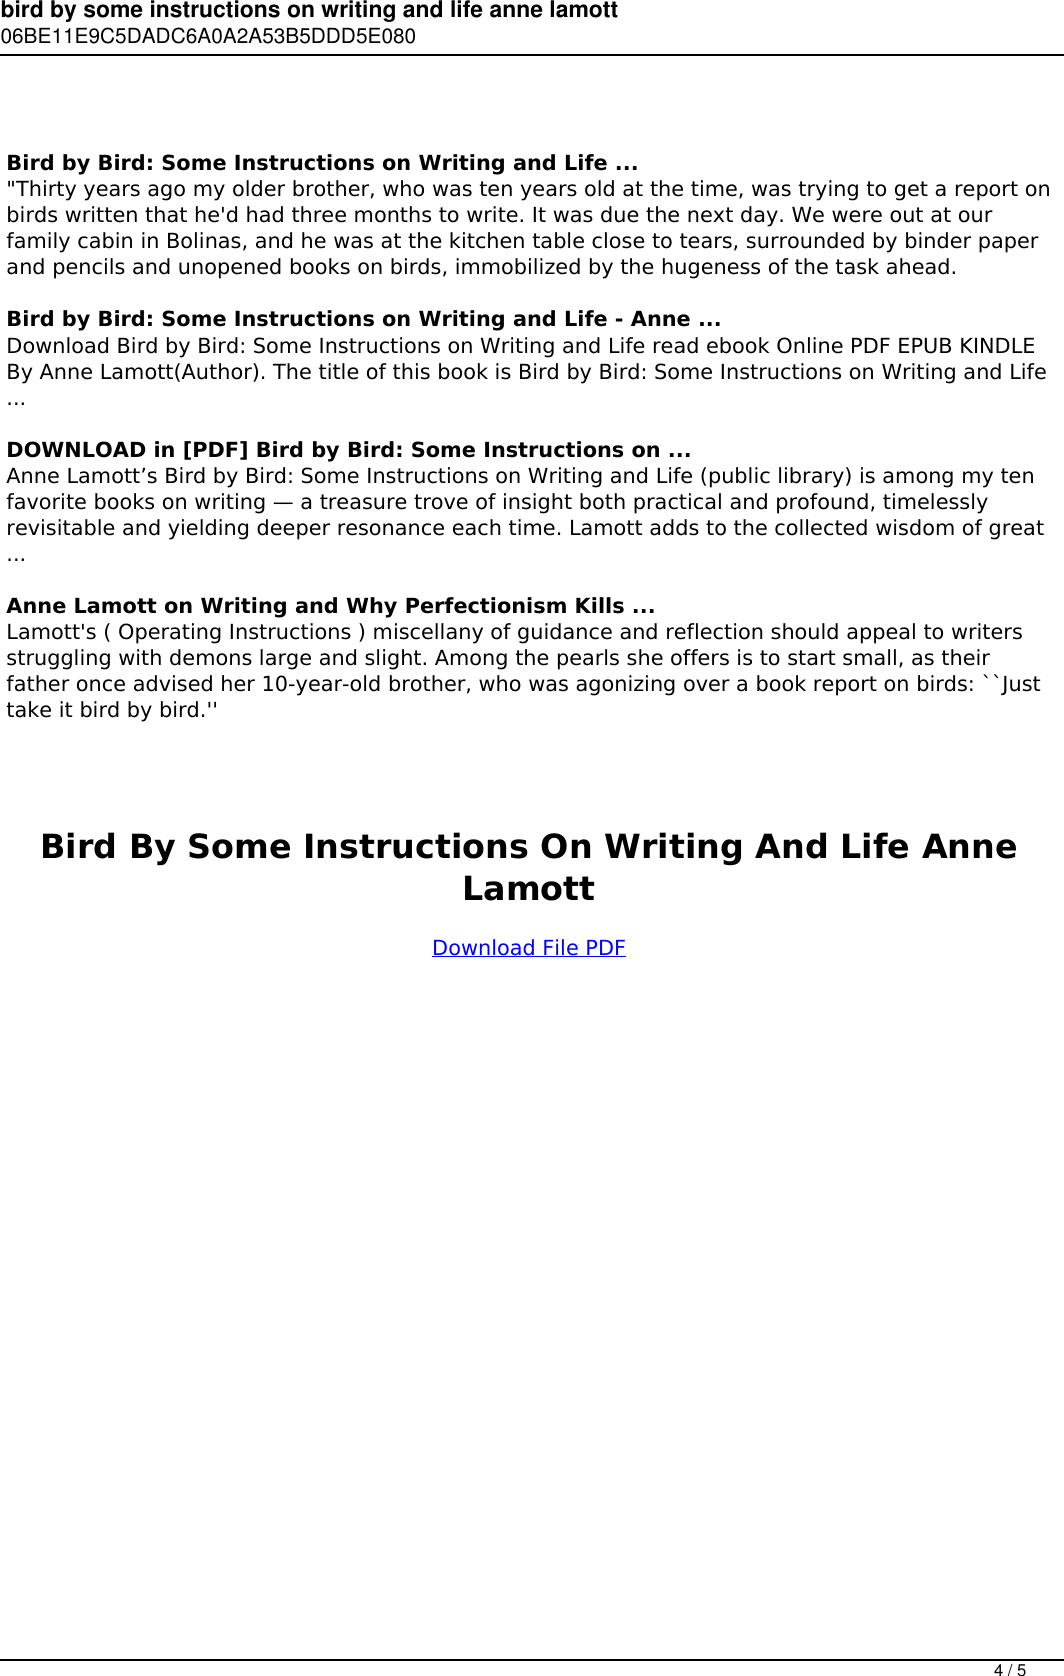 Page 4 of 5 - Bird By Some Instructions On Writing And Life Anne Lamott